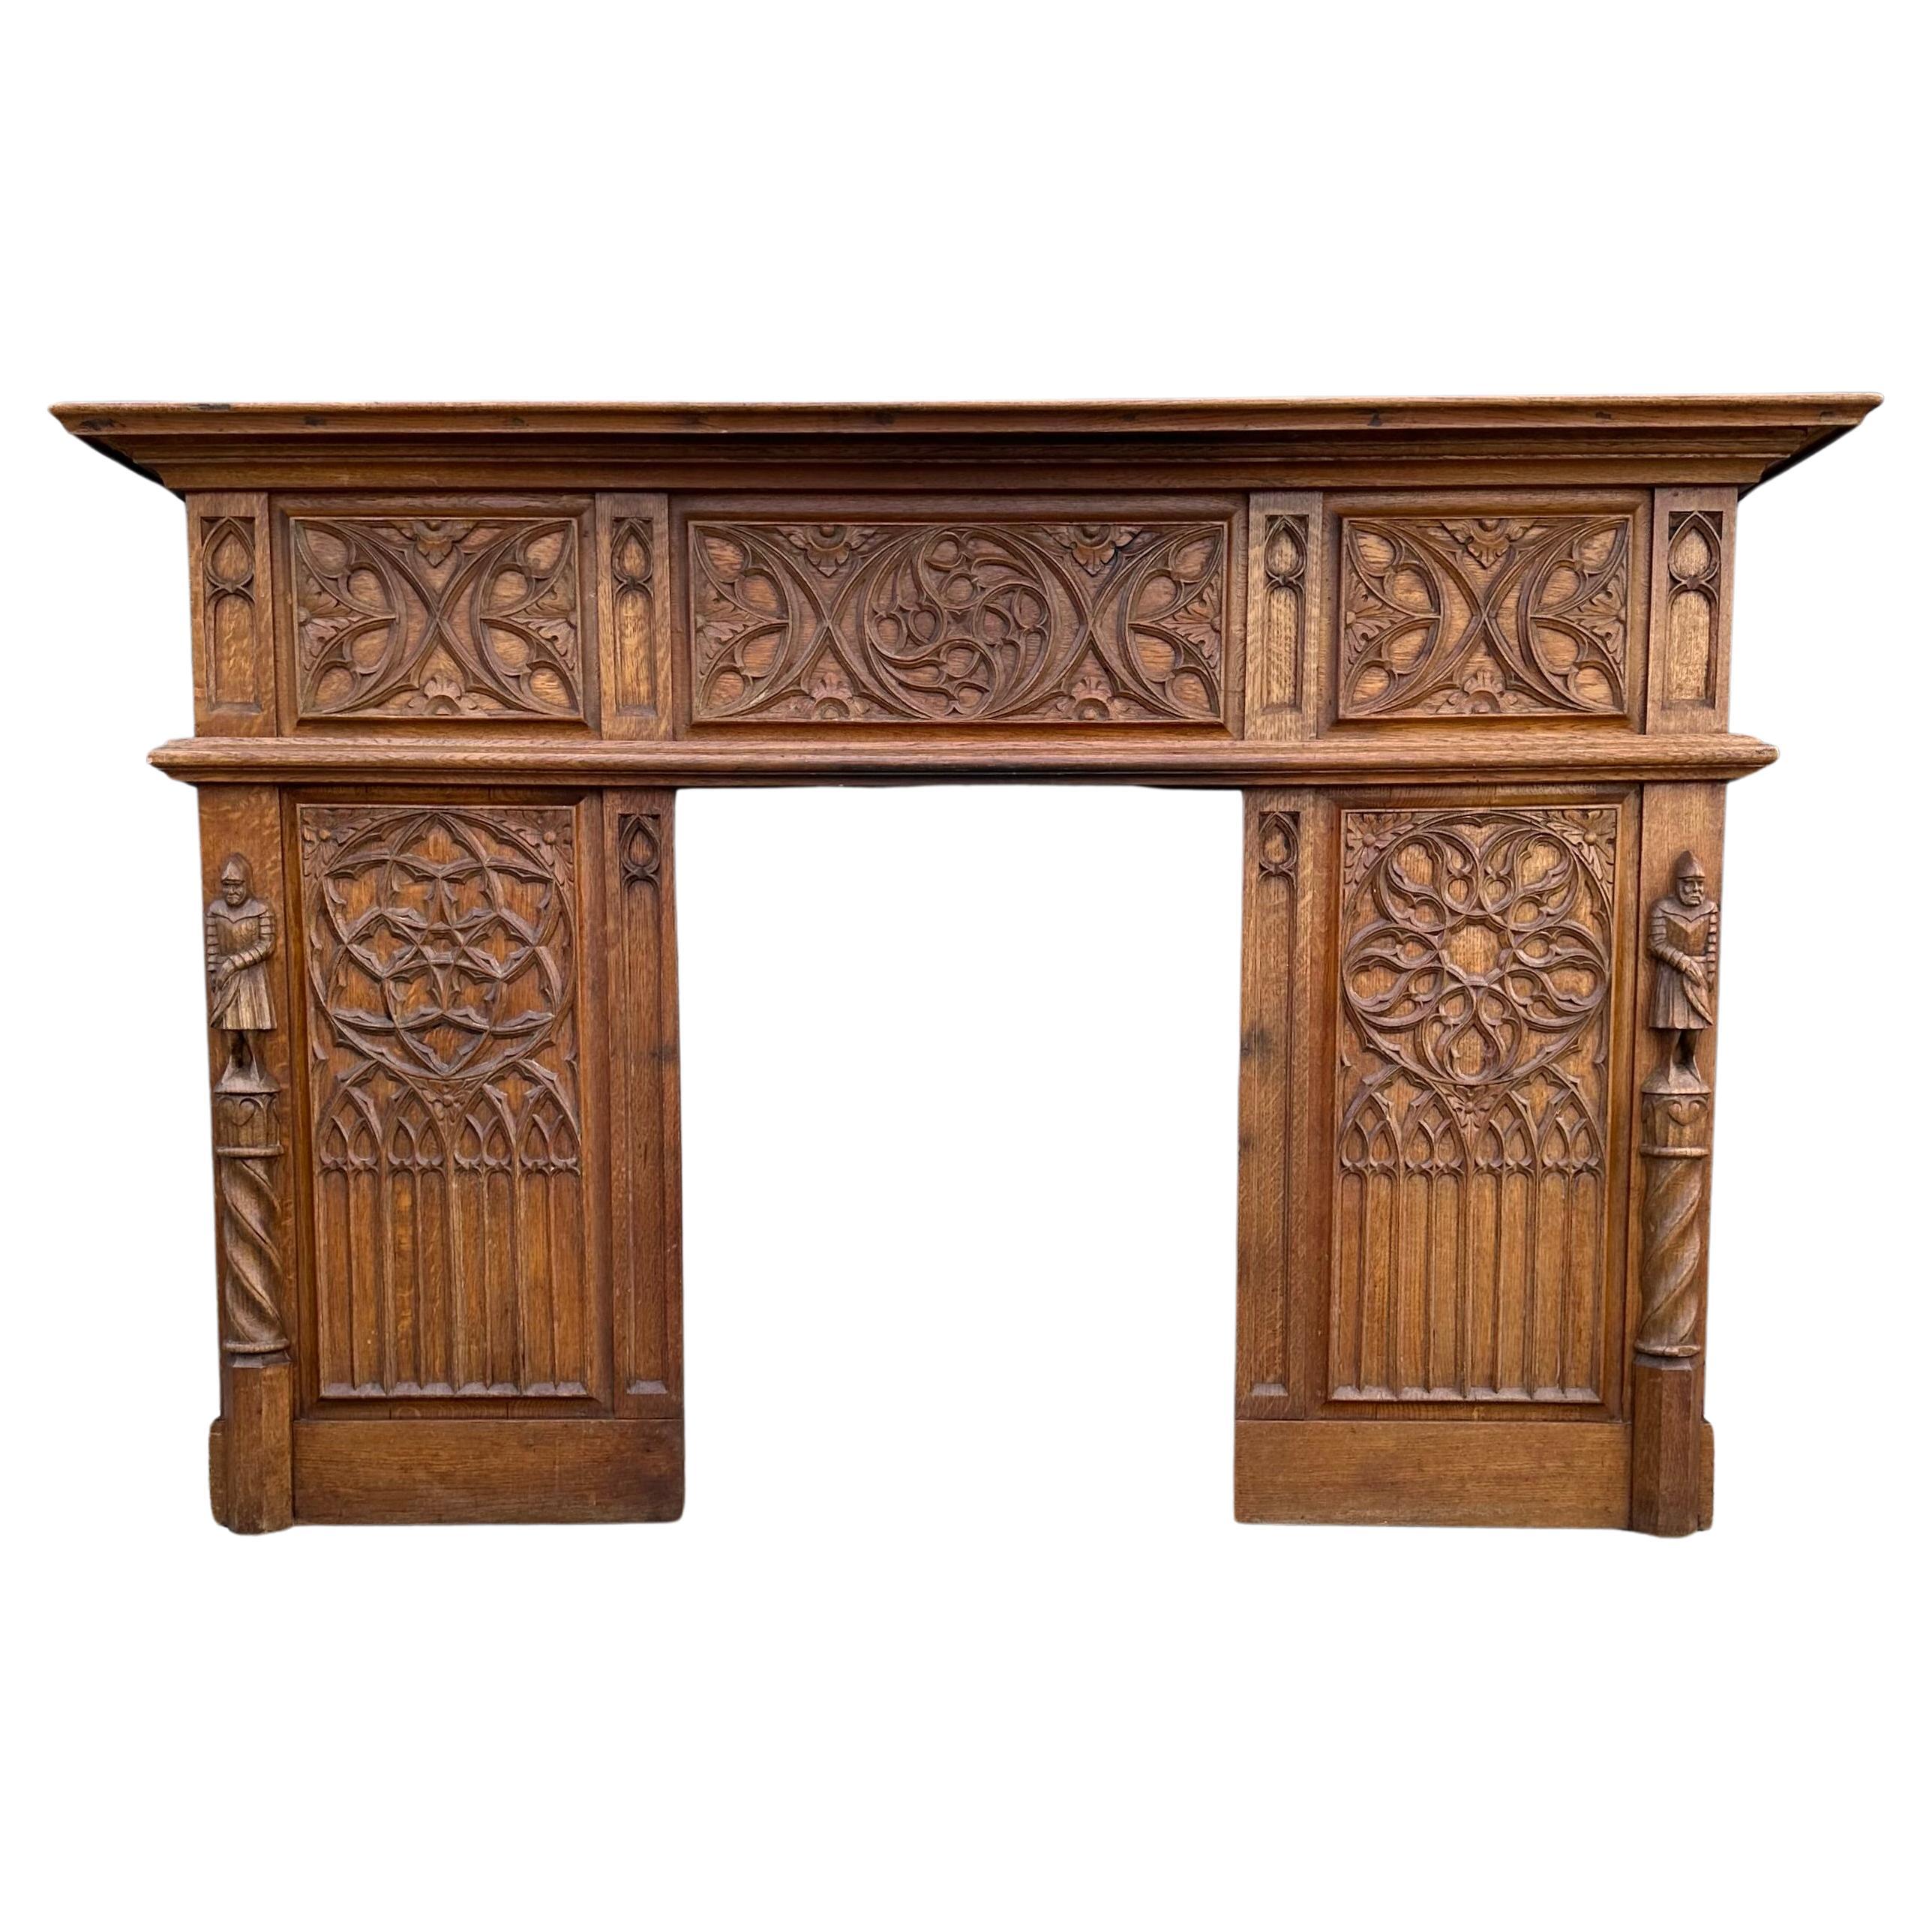 Gothic Revival Oak Fireplace Mantel with Carved Church Window Panels & Guards For Sale